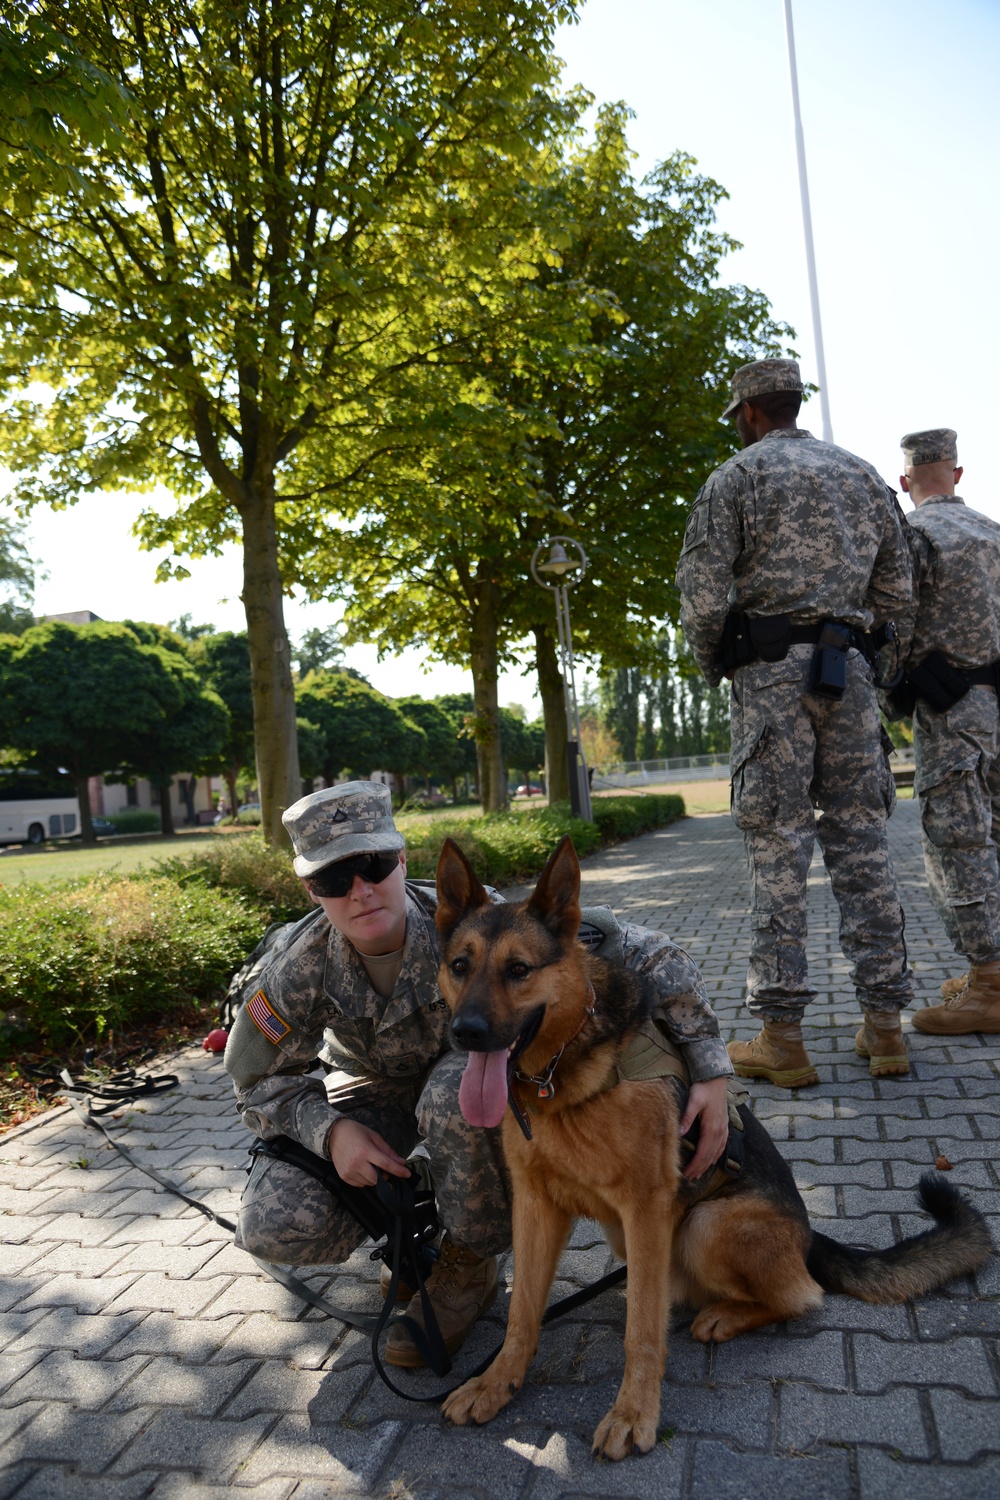 Working dogs, the Army's unsung heroes